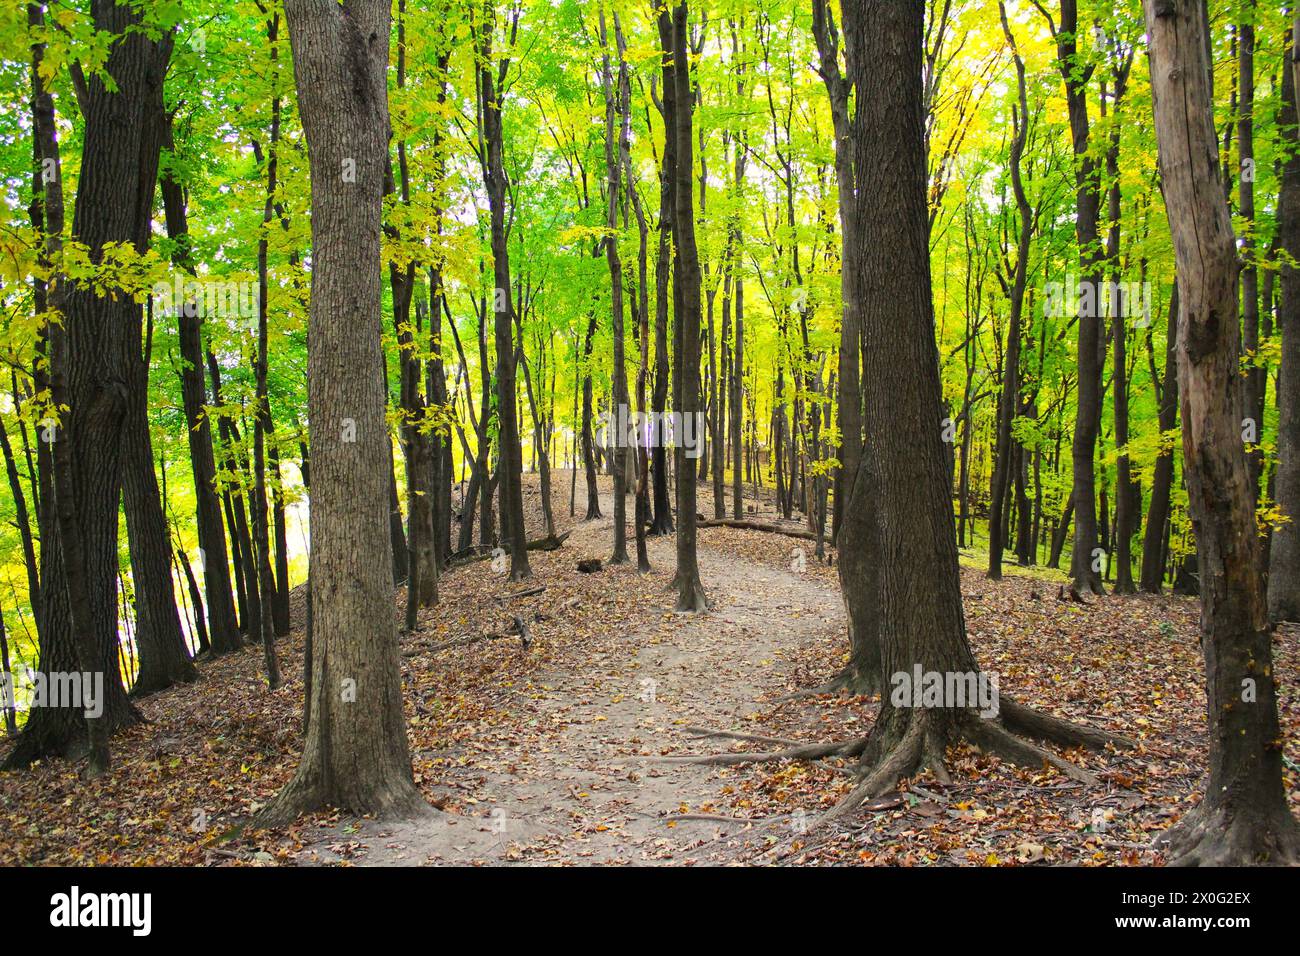 A hiking trail through a forest of green leafy trees in Minnesota Stock Photo